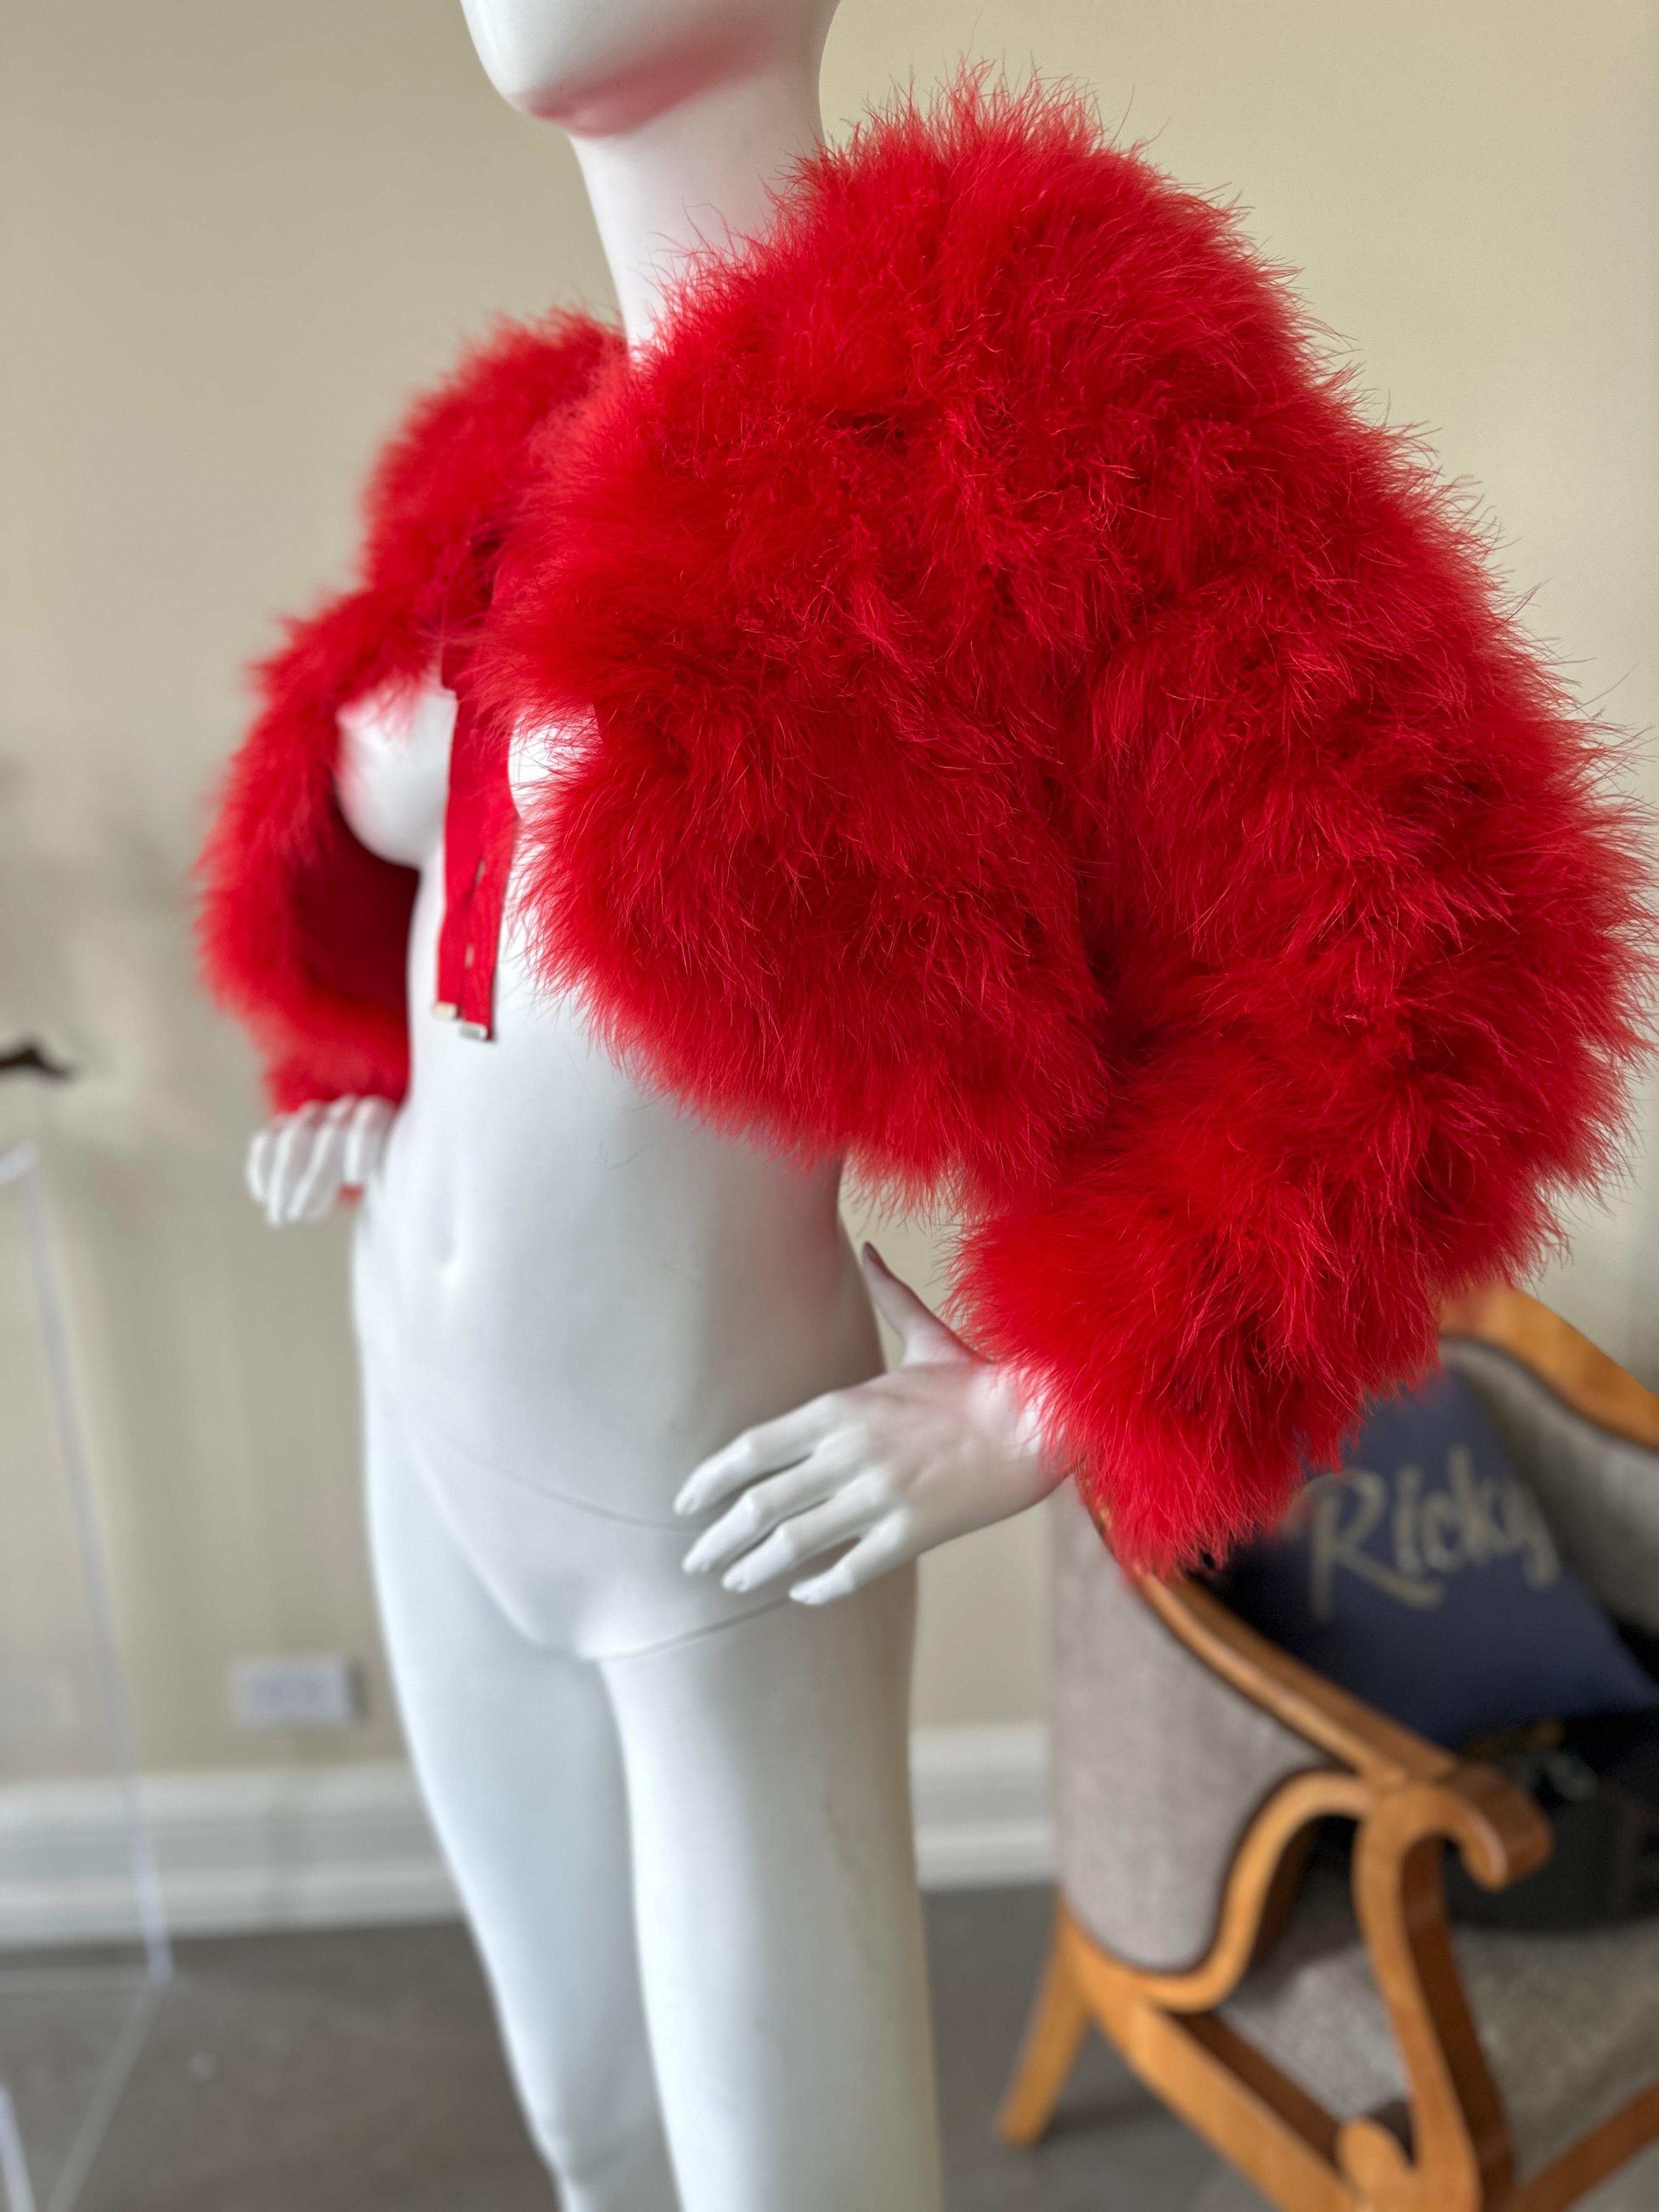 Ralph Lauren Purple Label Vintage Marabou Feather Shrug In New Condition For Sale In Cloverdale, CA